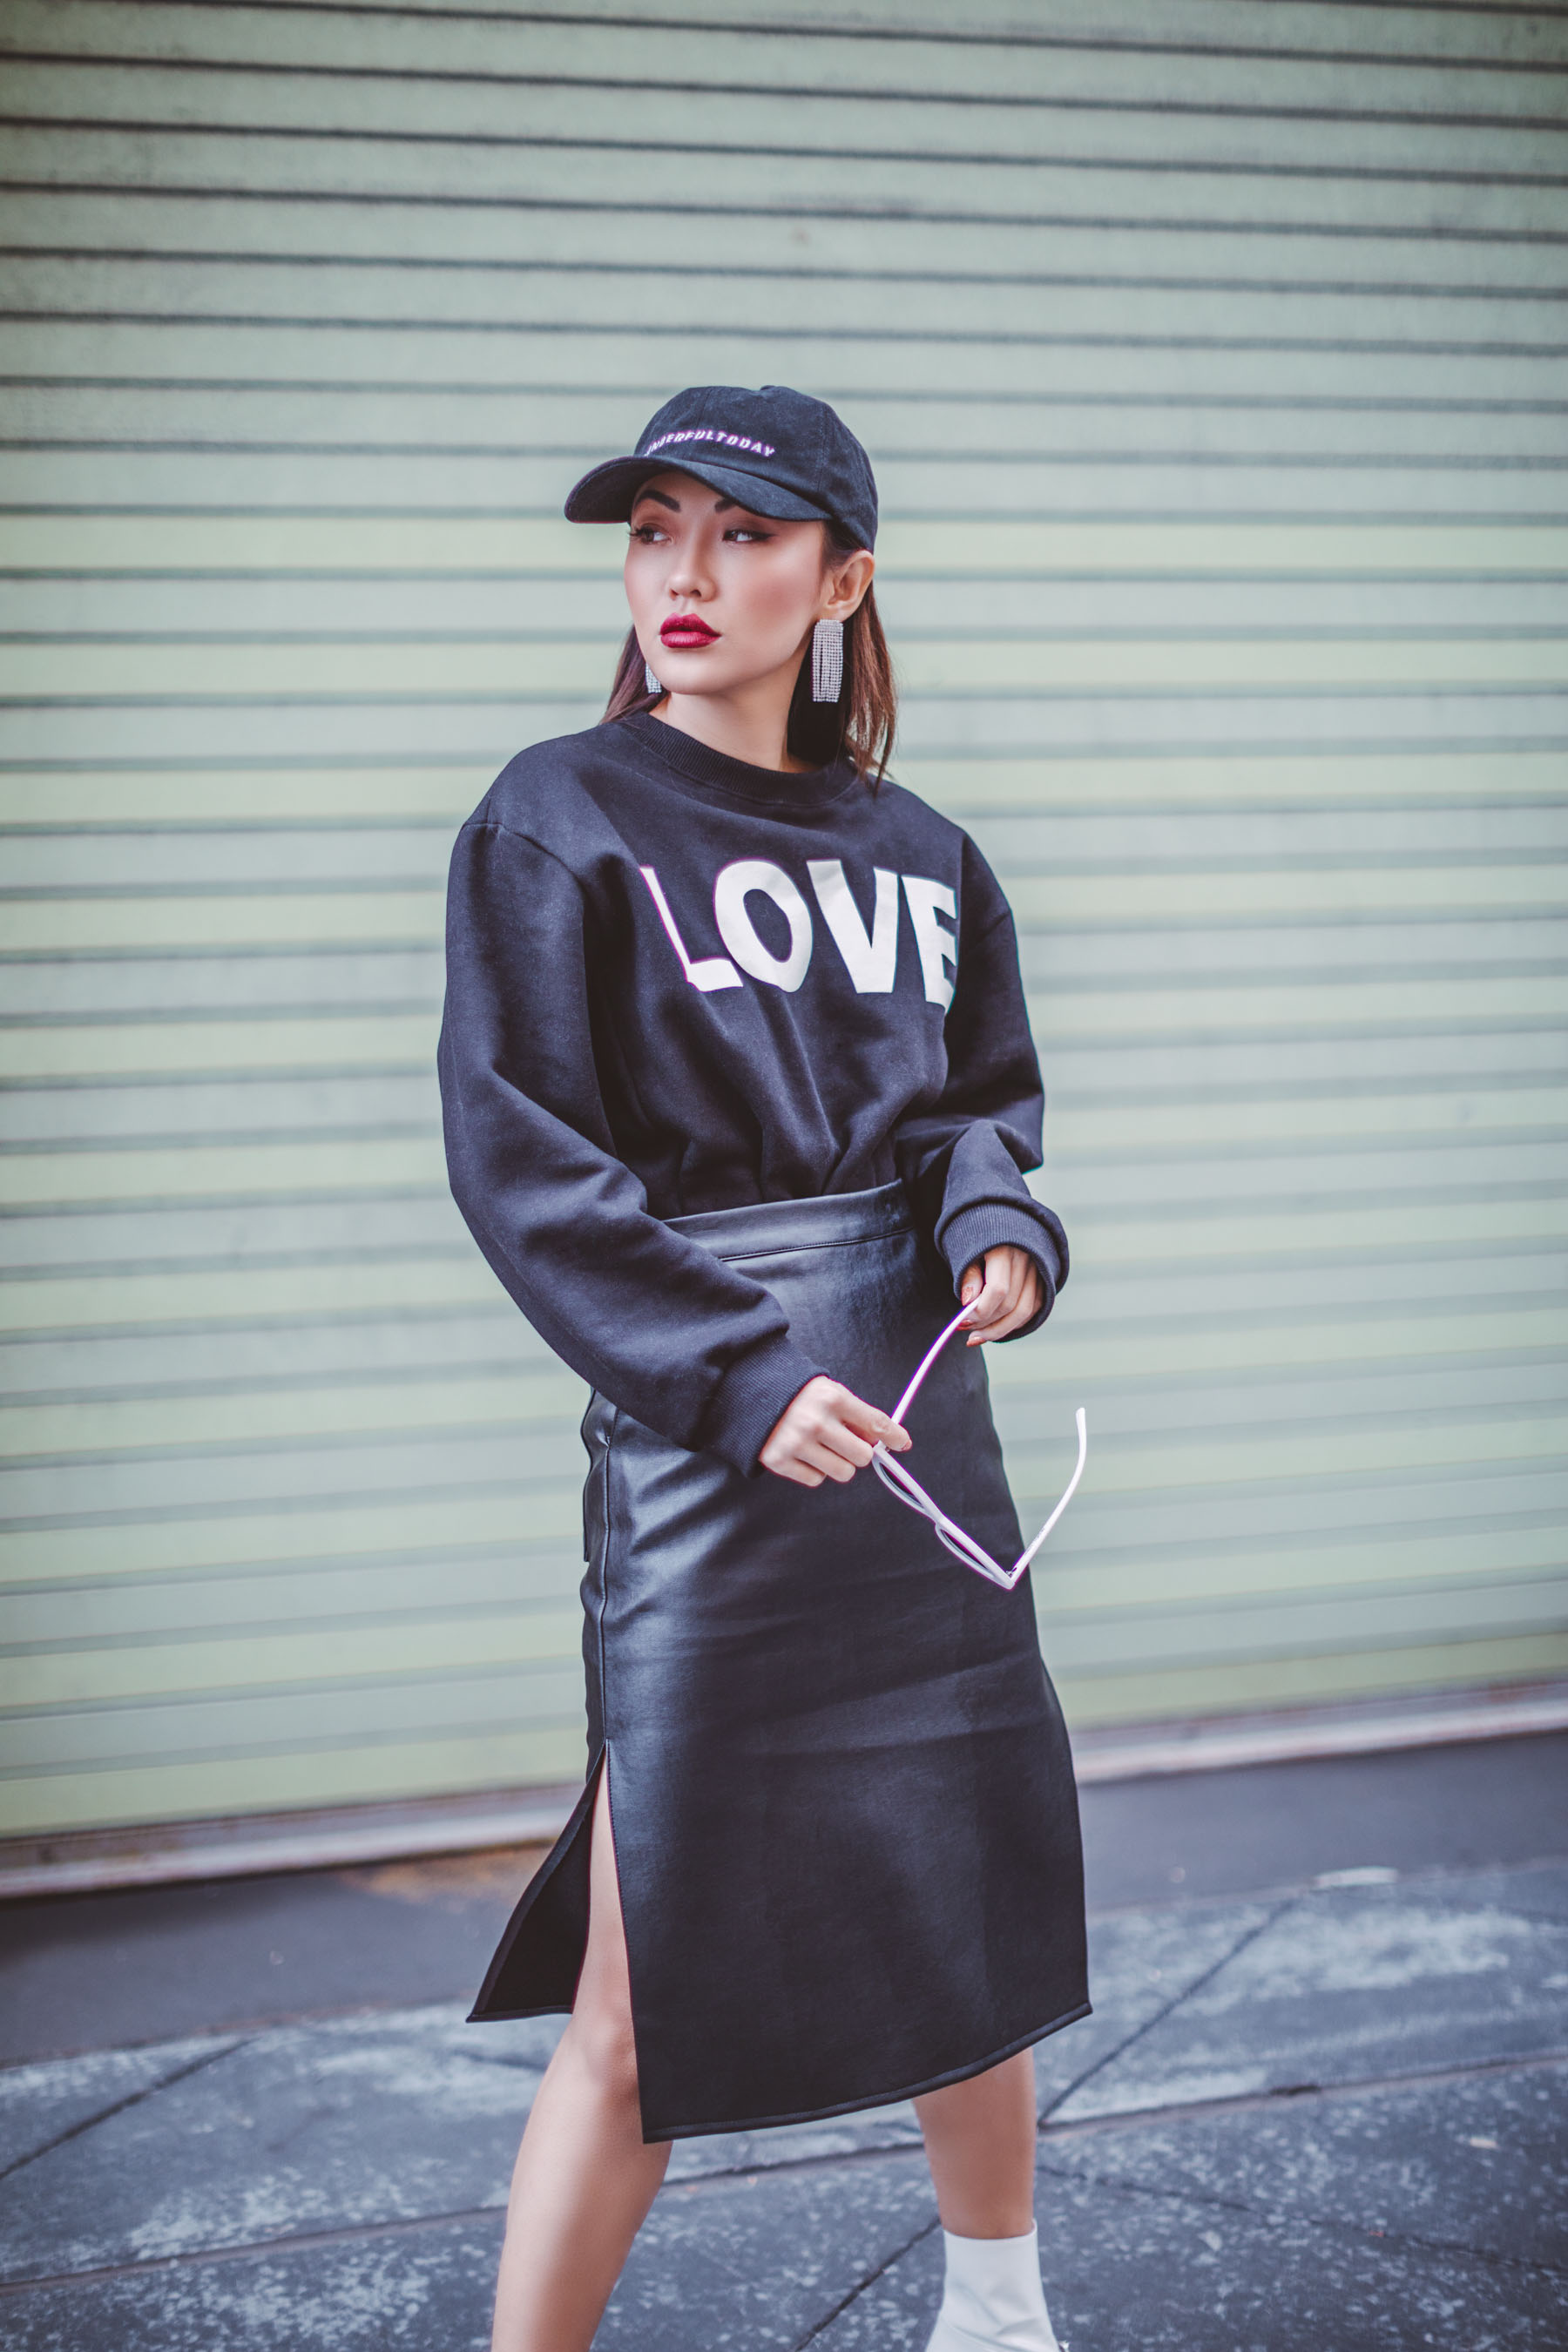 How to Look Stylish in a Quilted Puffer Jacket // Notjessfashion.com // oversized graphic sweater with baseball cap, leather skirt, and pink sunglasses, new york fashion blogger, asian blogger